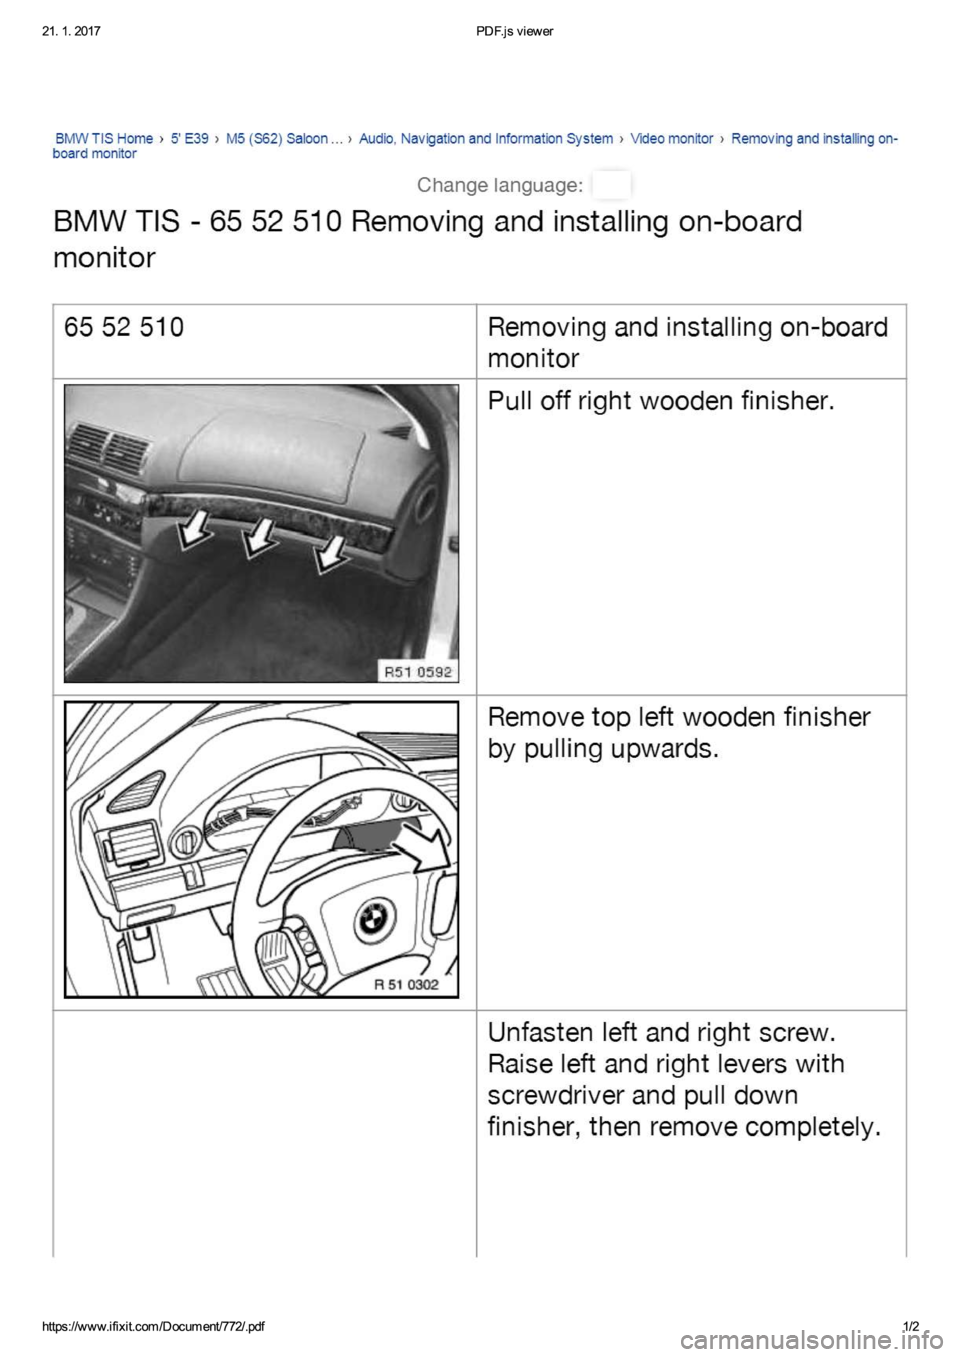 BMW M5 2002 E39 Removing and instaling onboard monitor 